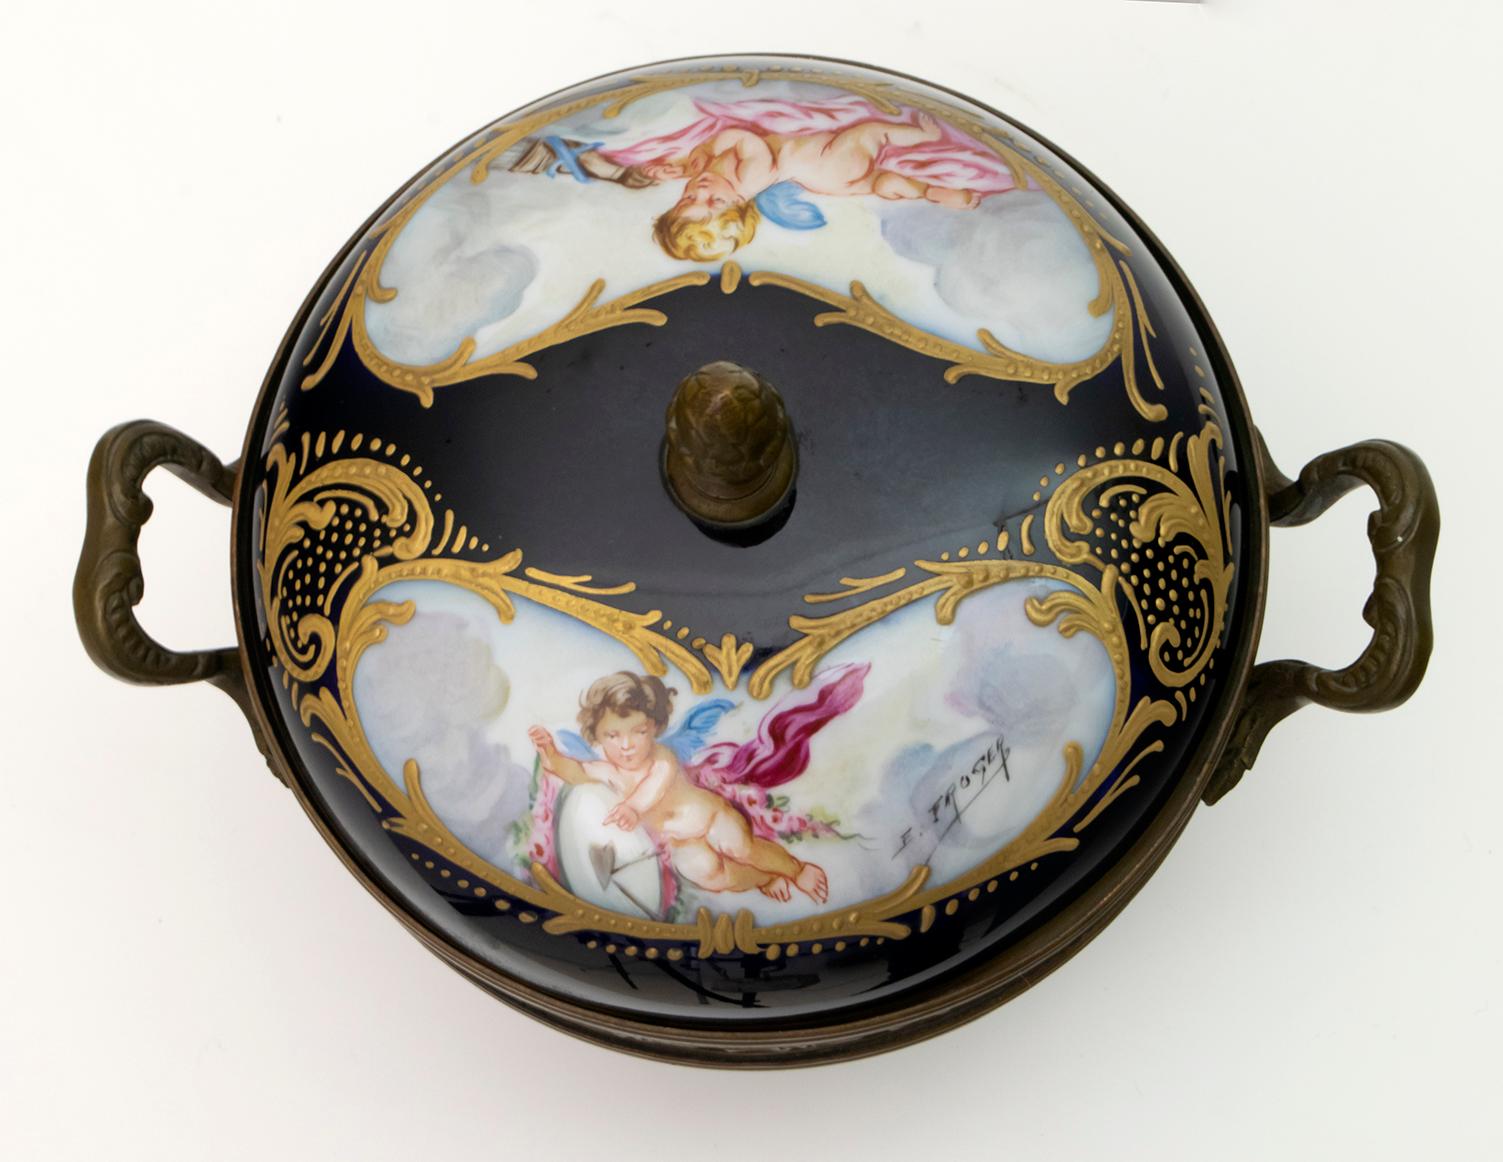 Signed E. Froger 19th Century French Porcelain Potpourri by Sevres, 1880 For Sale 7